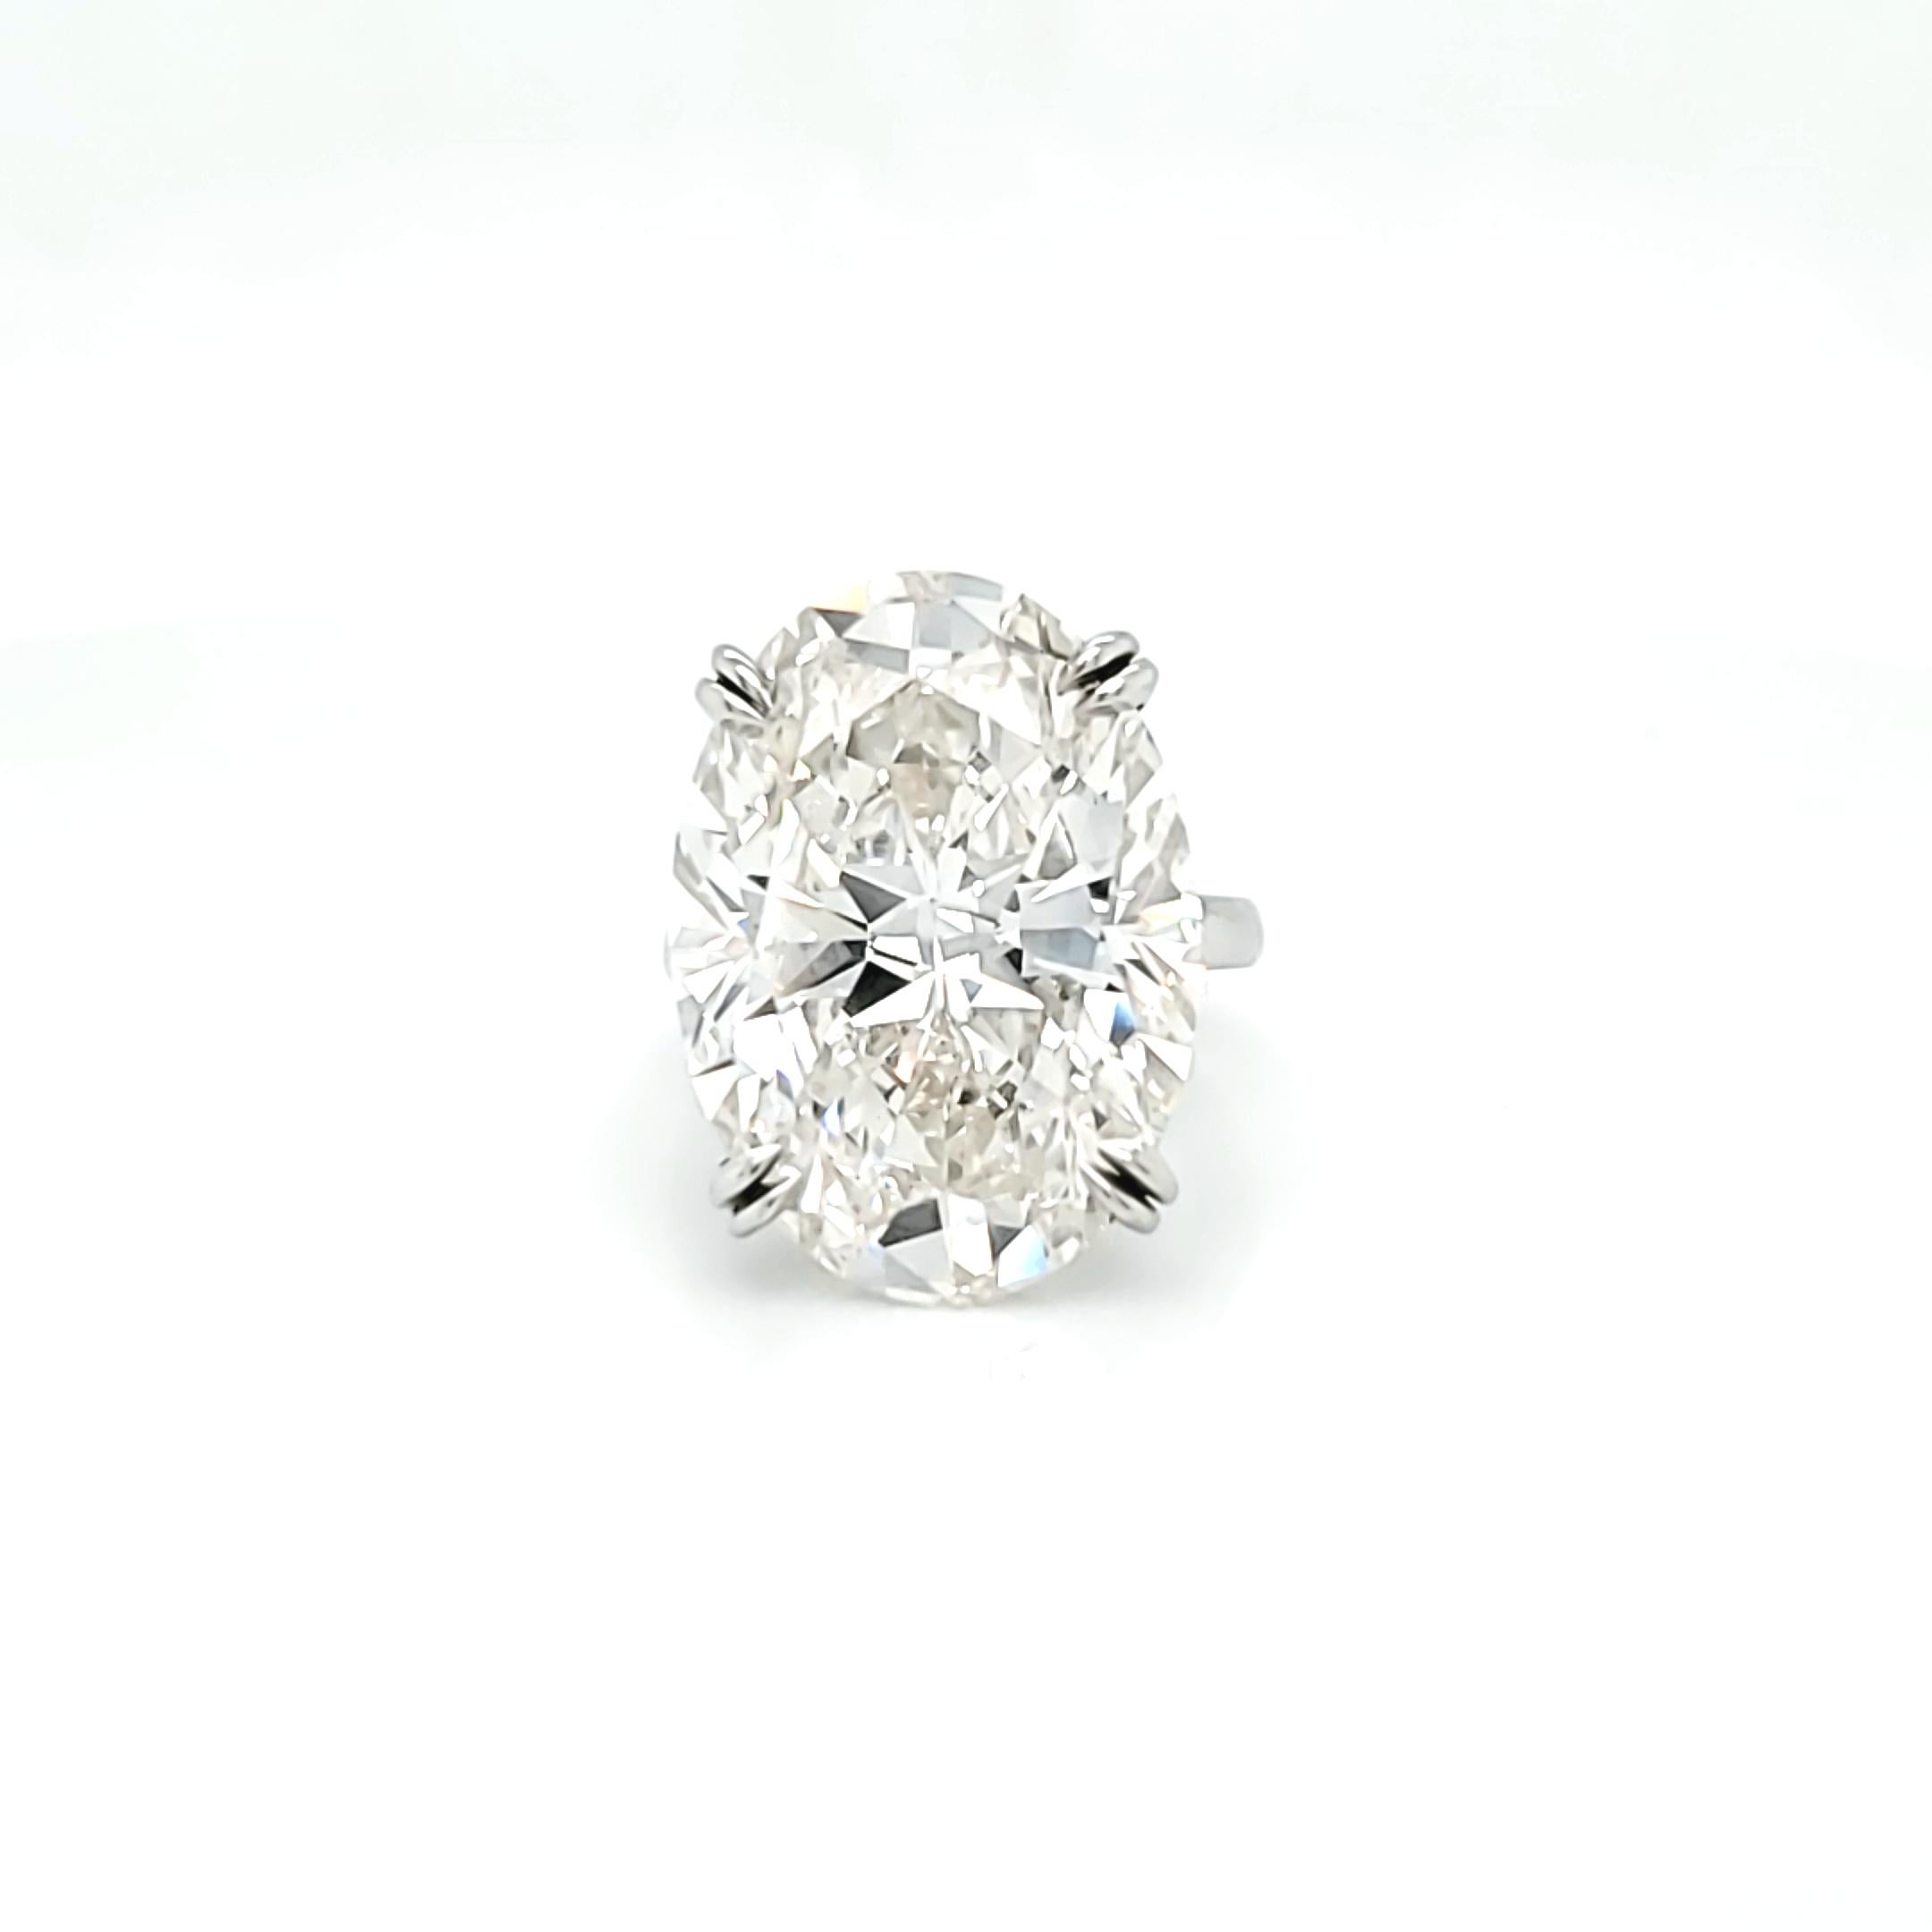 GIA certified 23.88 carat I color VVS2 Clarity Oval Cut Diamond. Set in a handmade solitaire band. Finger size is currently 6.5 but can be adjusted as needed. We can include a setting of your choice for this item Up to $15,000 value.